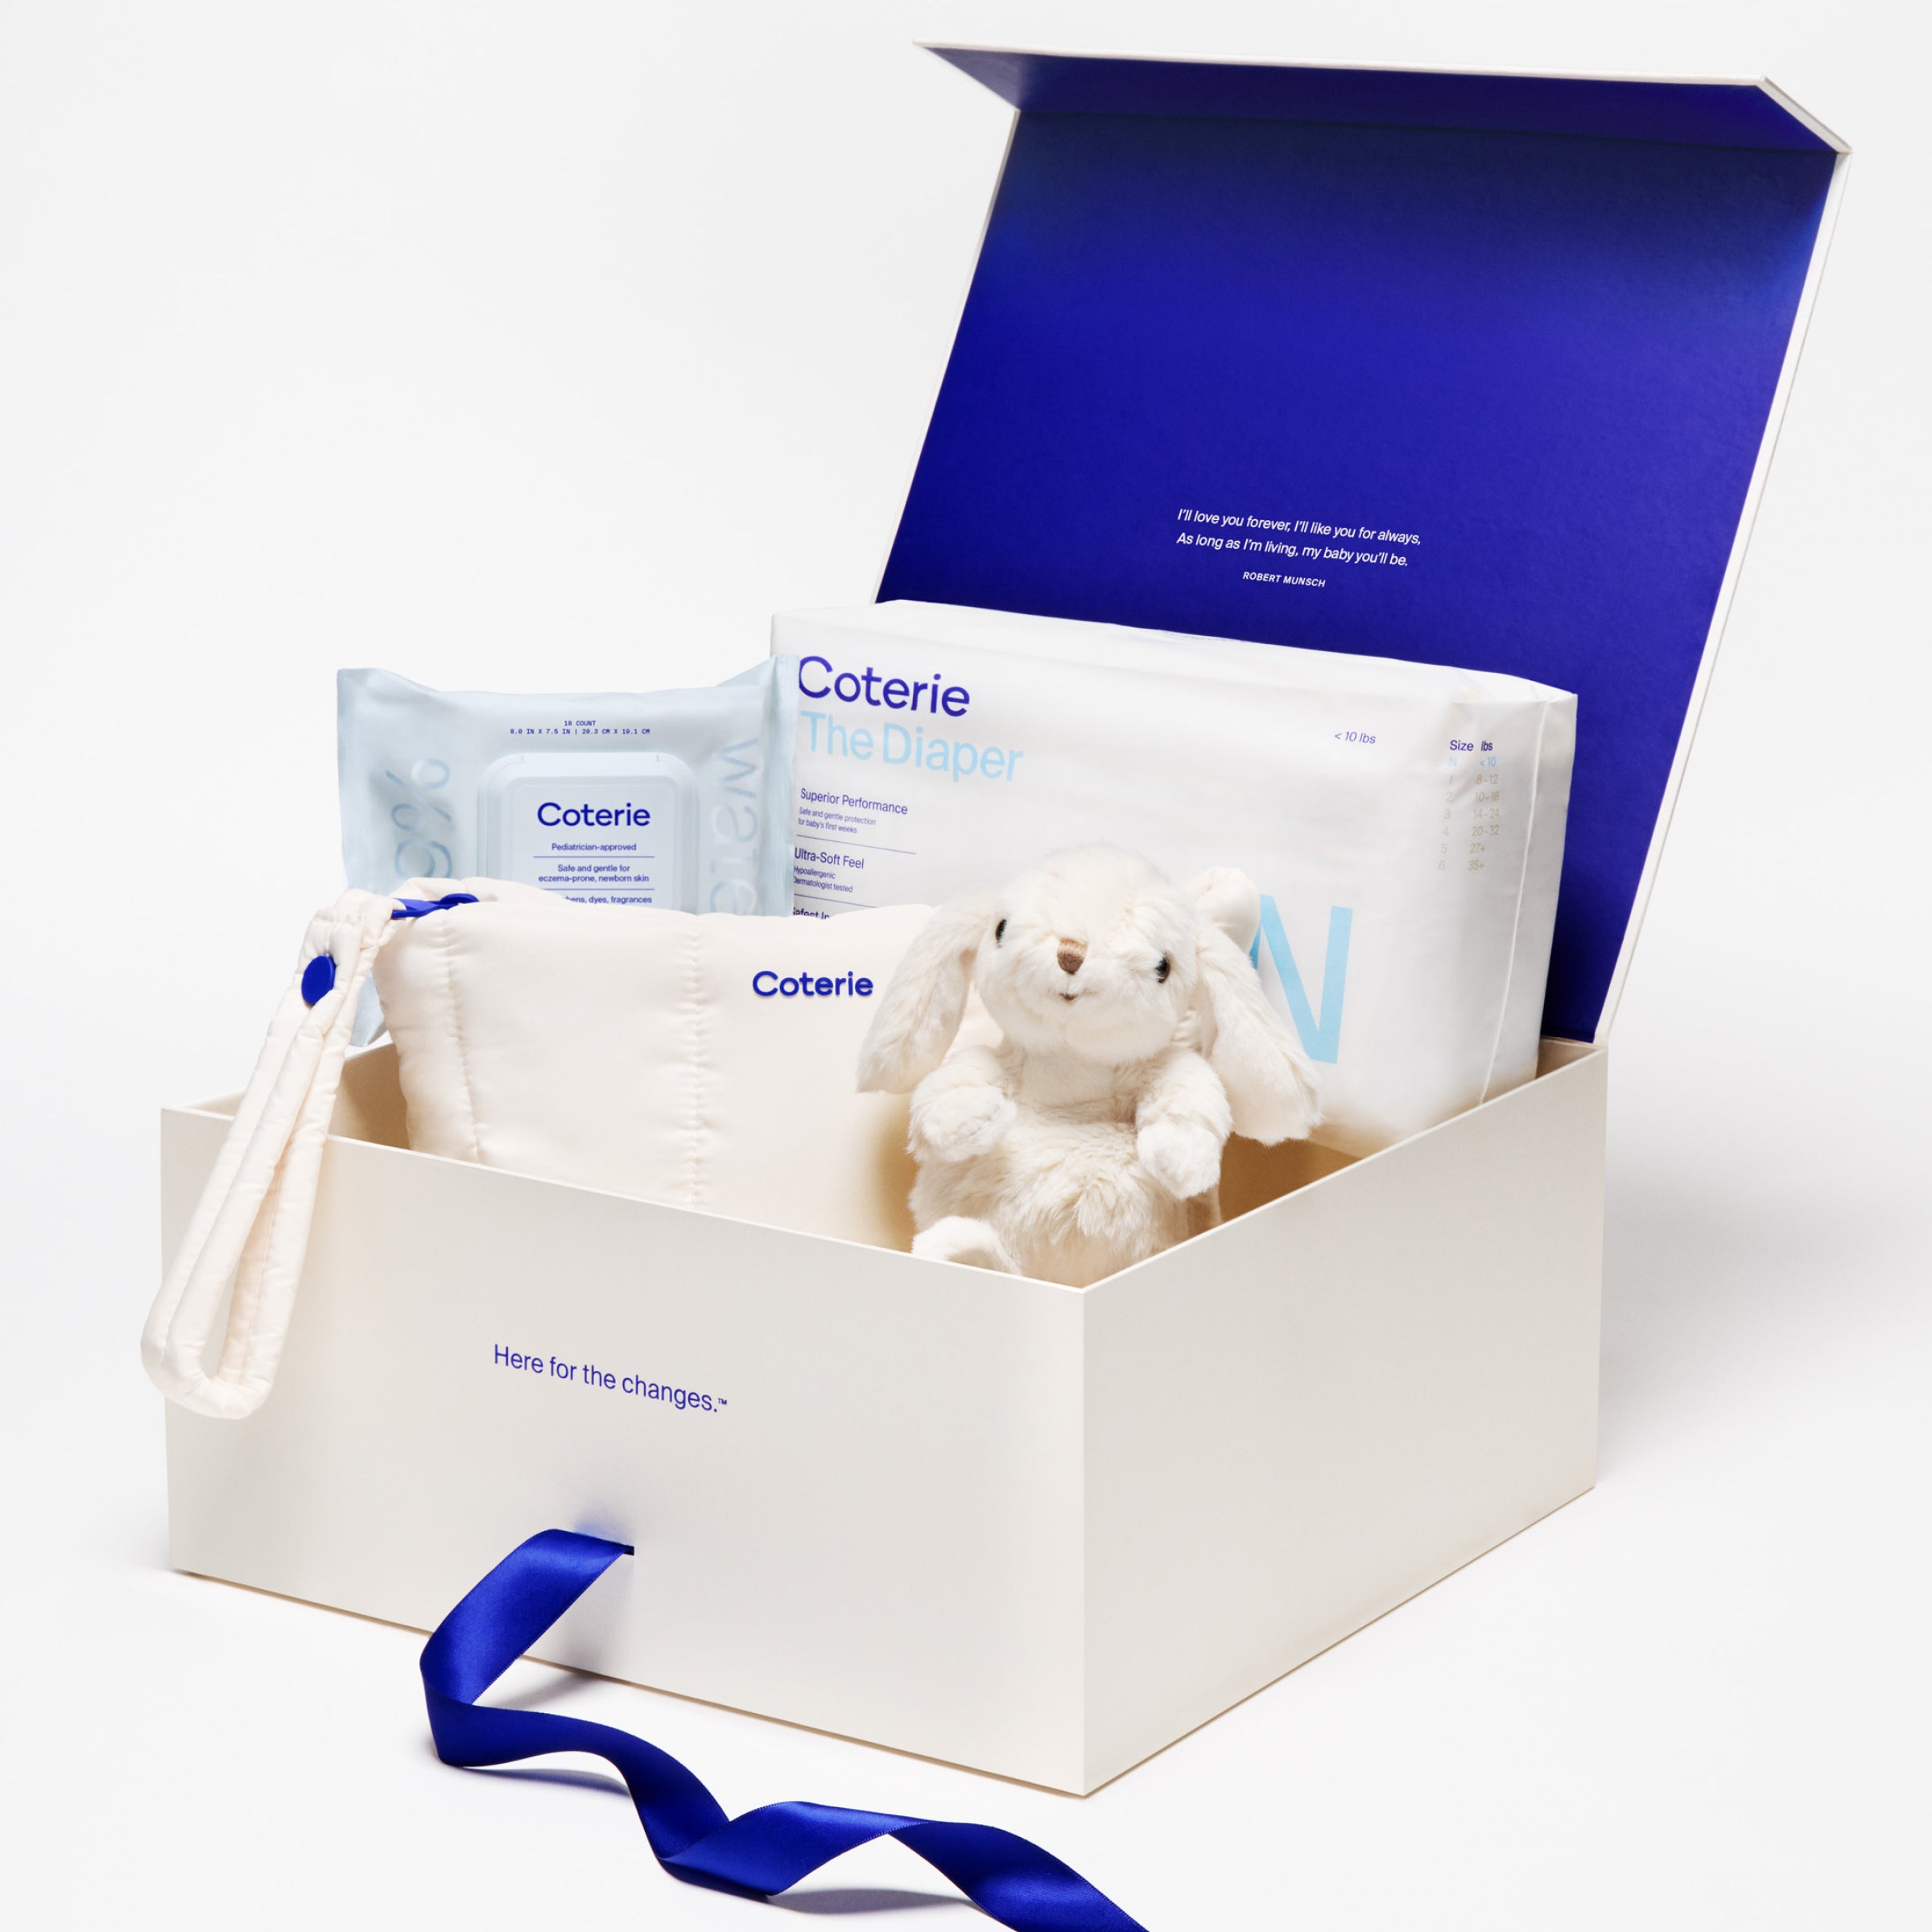 Upgrade your diapering routine with Coterie Diapers, Baby Wipes 